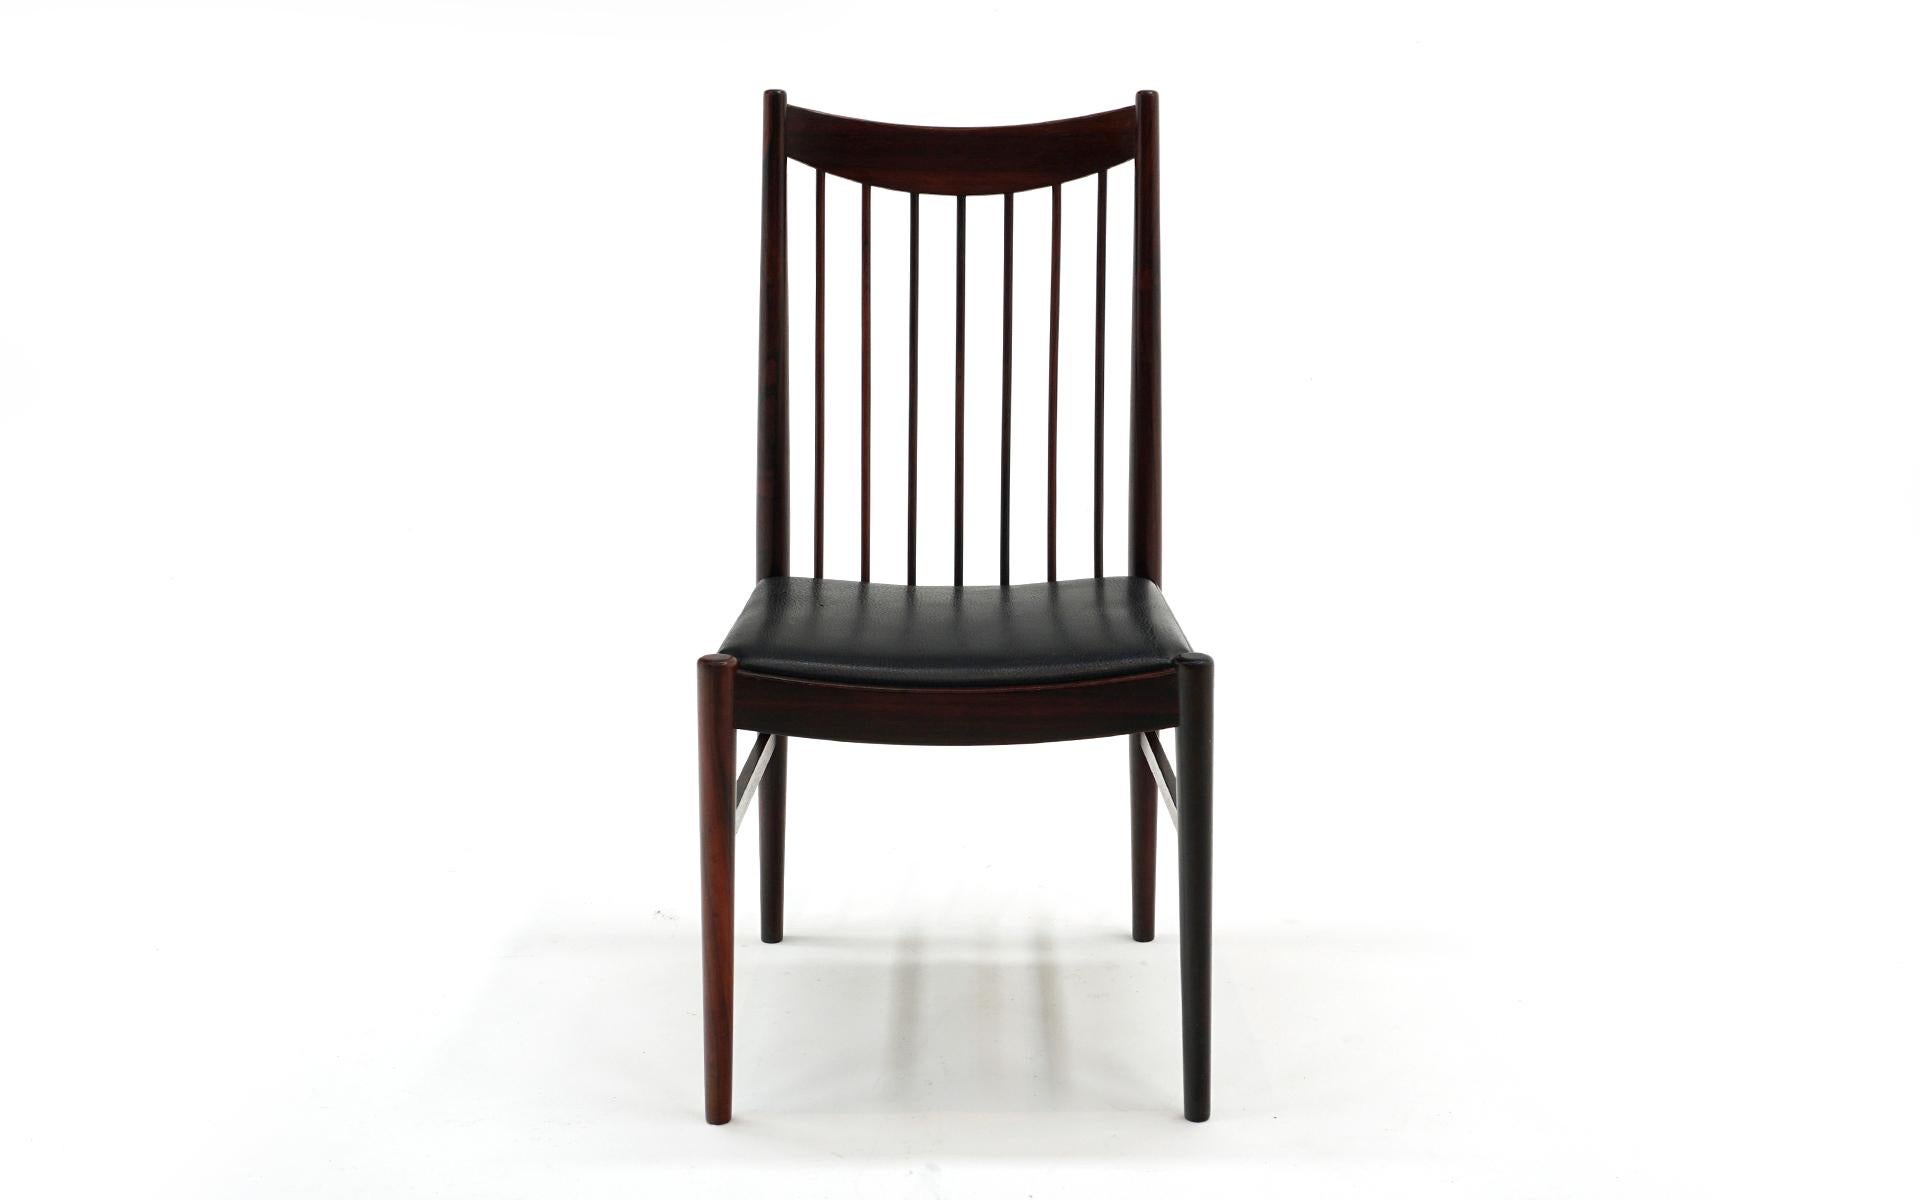 Single Brazilian rosewood dining side chair designed by Arne Vodder for Sibast, 1960s, Denmark.  This chair is in very good condition and ready to use.